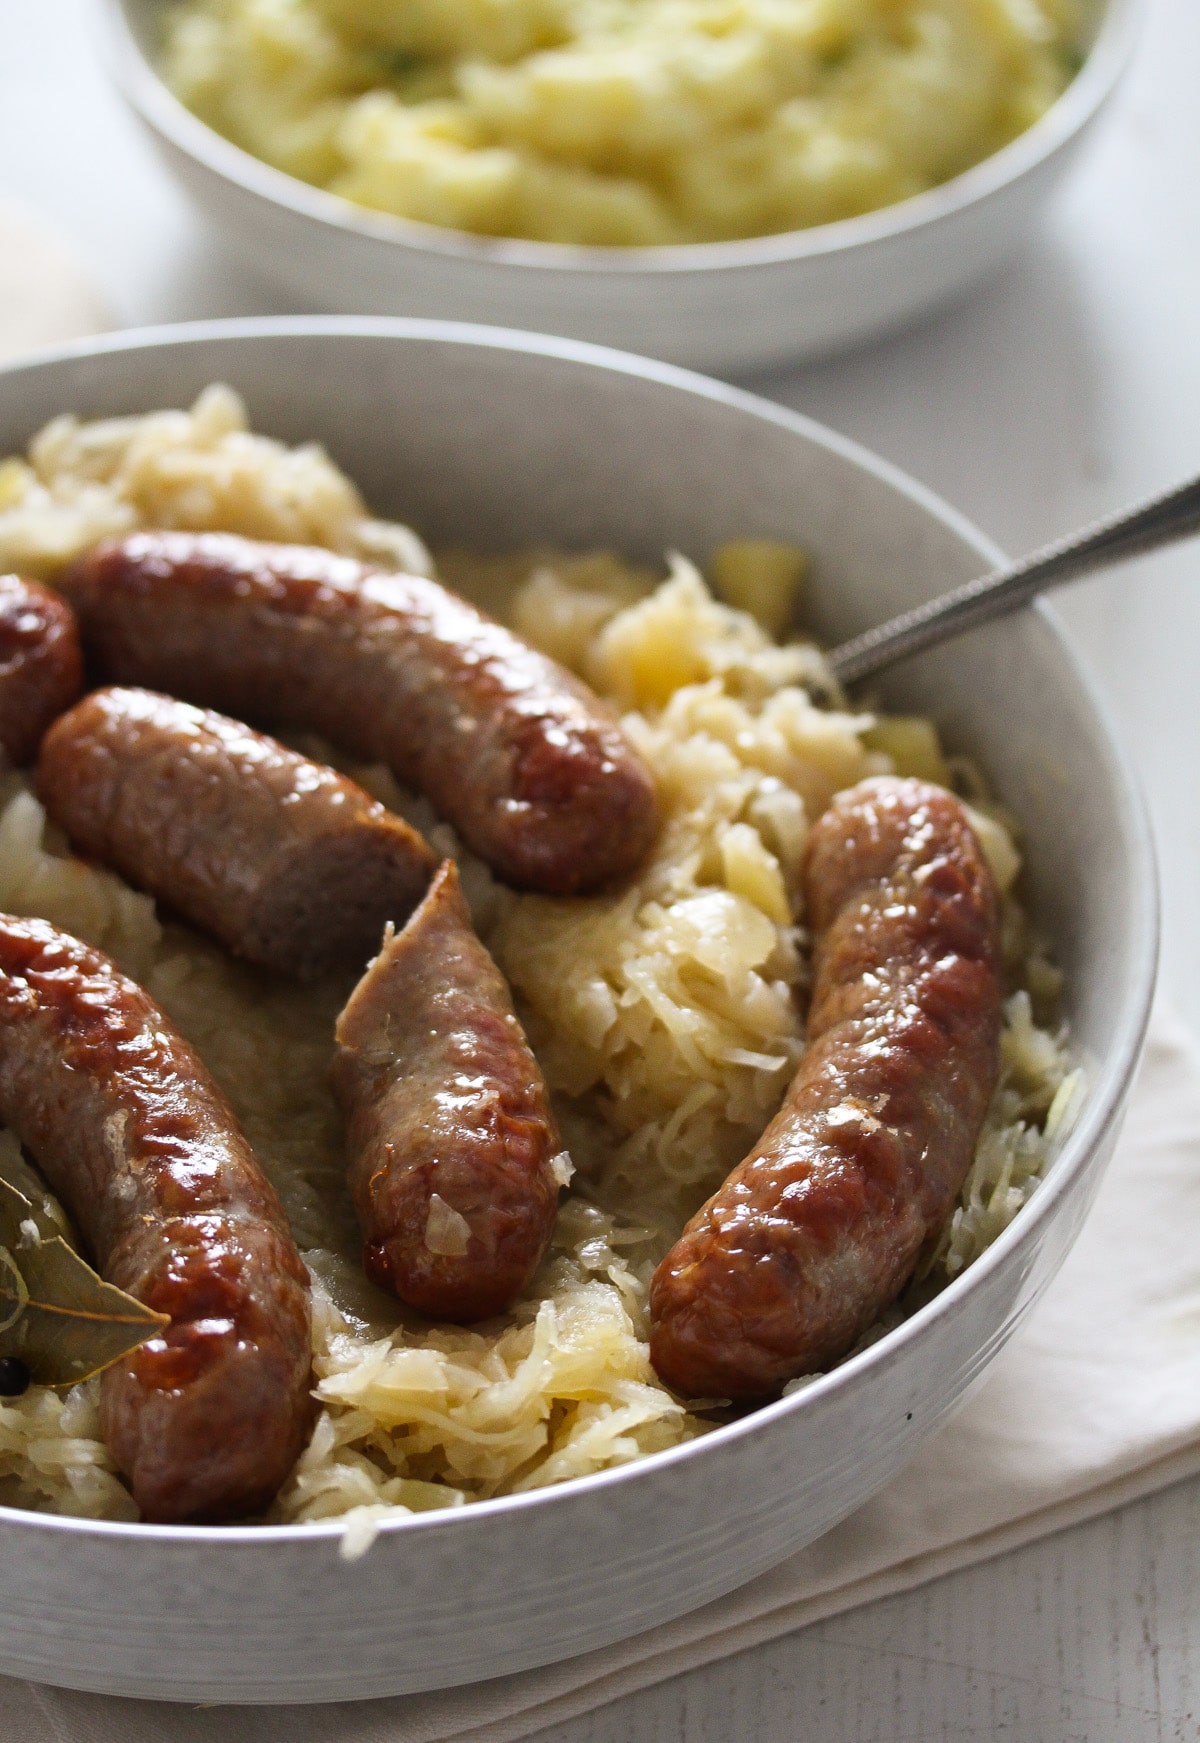 bratwurst cooked in oven and served on sauerkraut